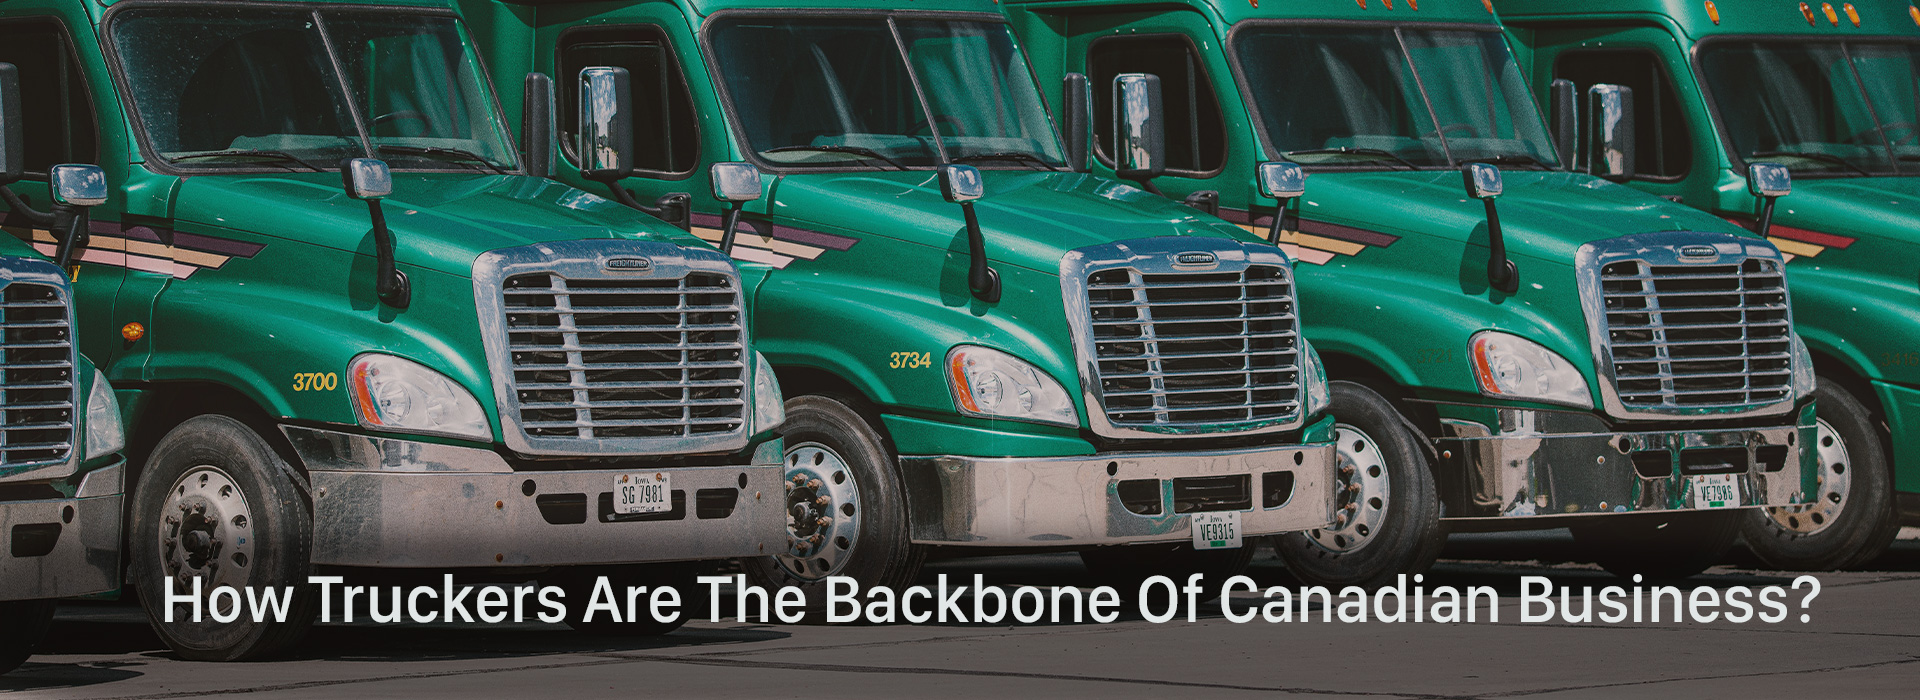 How Truckers Are The Backbone Of Canadian Business